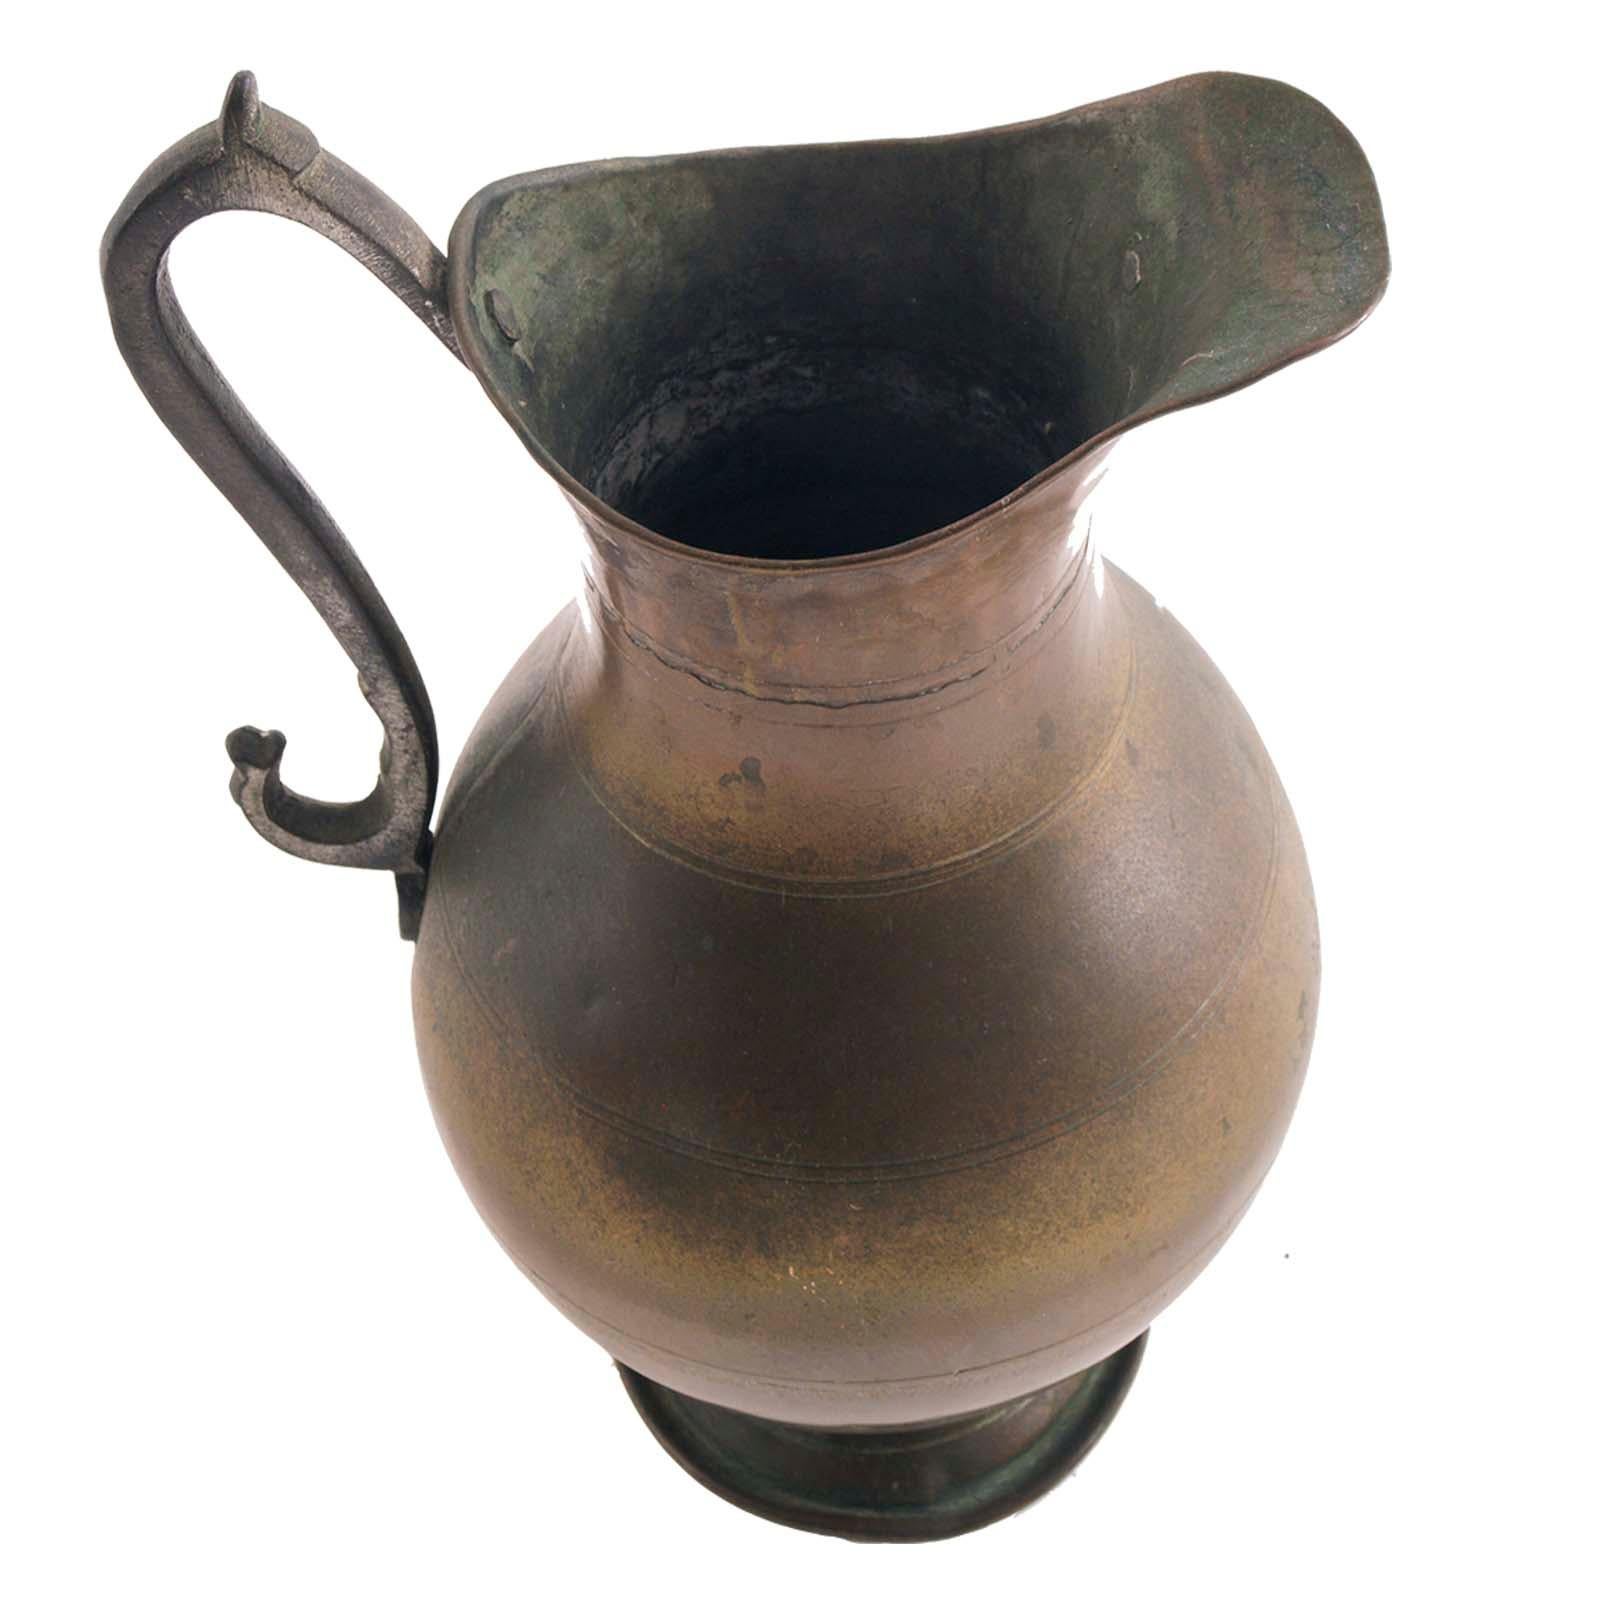 Baroque Antique Water Jug or Pitcher, from the Ottoman Empire, Handmade in Heavy Copper